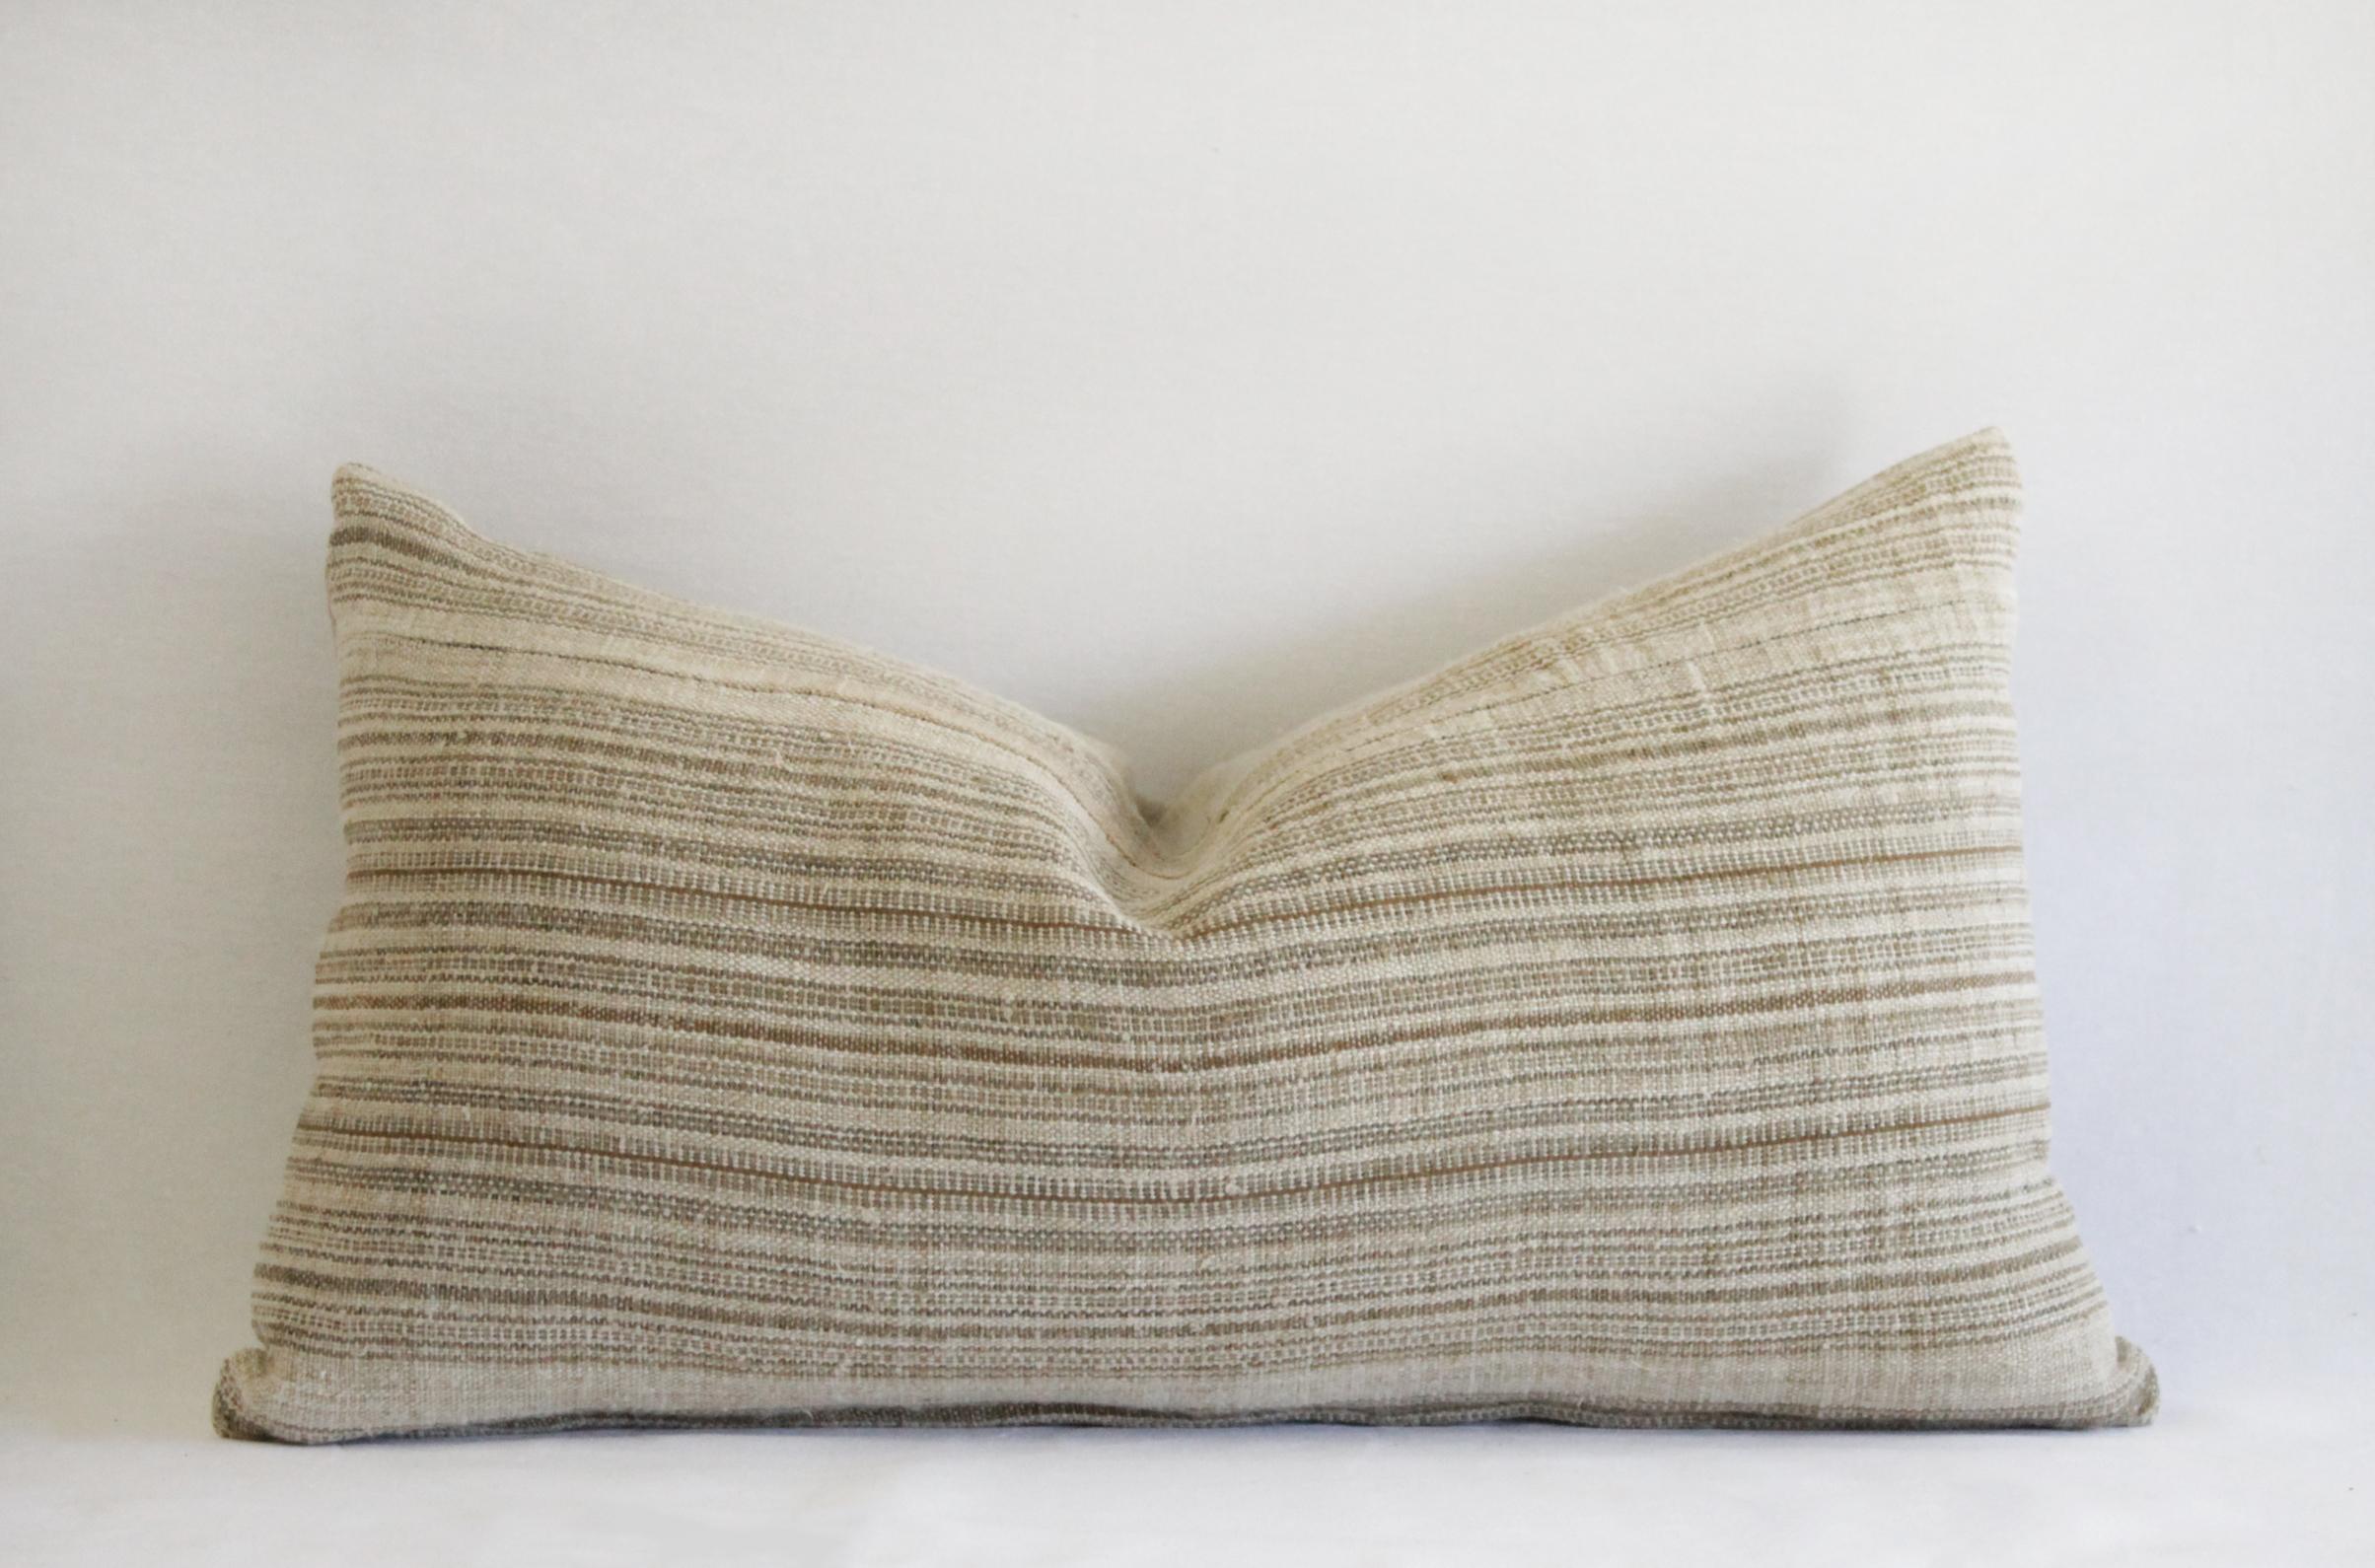 Antique Homespun linen pillows in natural and brown stripe.
Custom made from antique textiles, these pillows are so beautiful with a natural background color, and tonal brown stripes. Backing is a flax Belgian linen.
Hidden zipper closure, insert